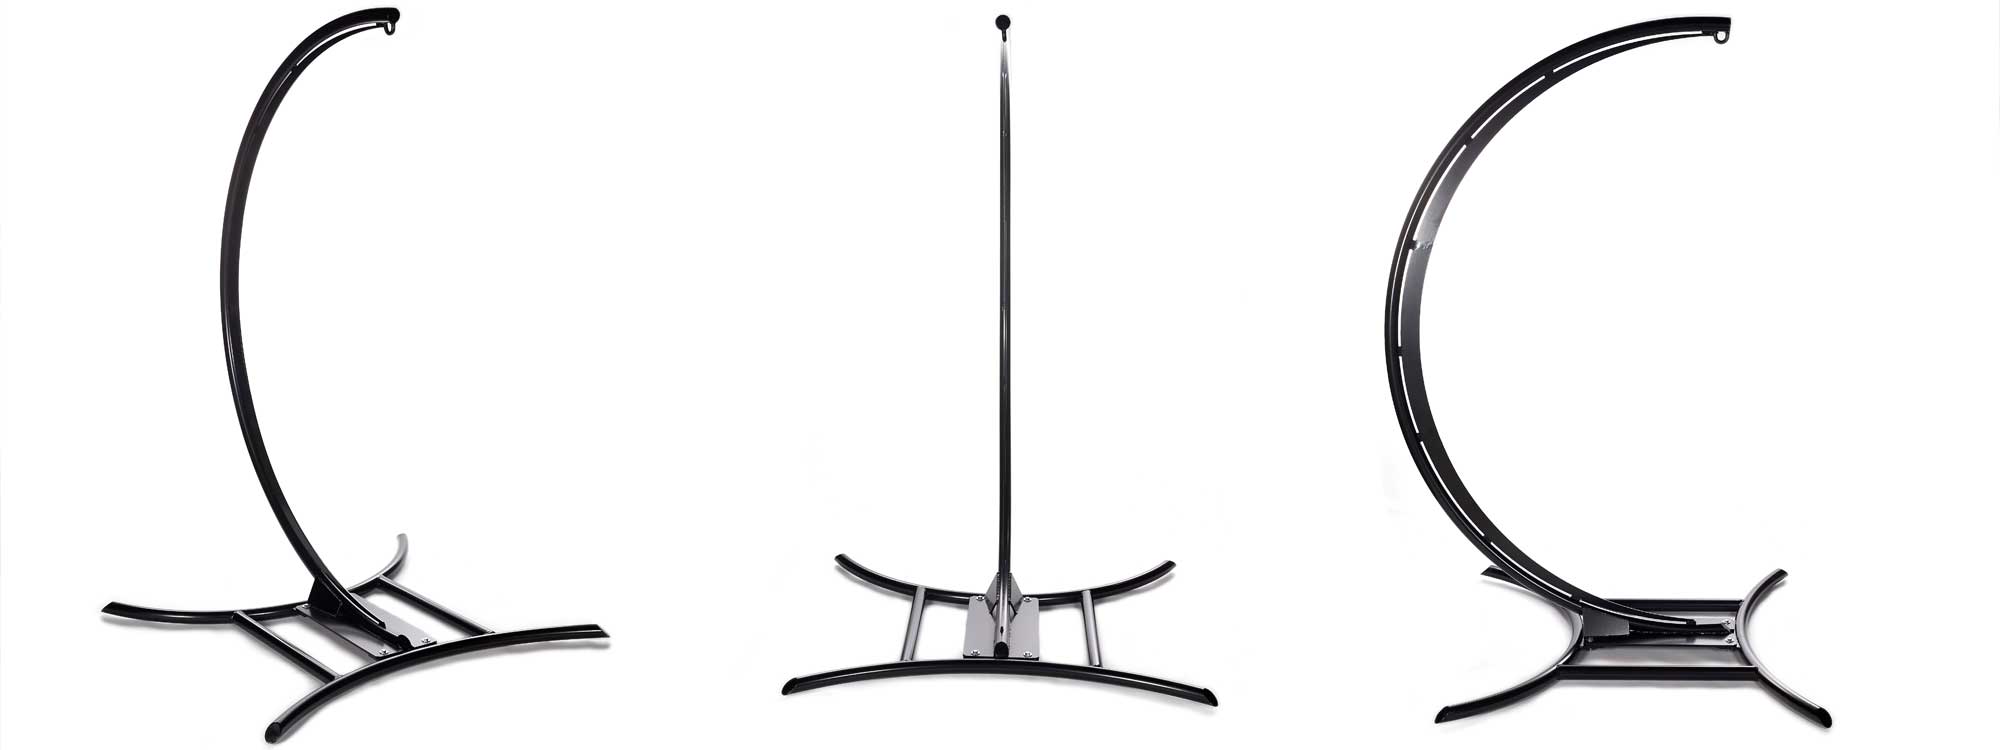 Bios hanging chair stand & heavy duty hanging chair frame in high quality swing seat base materials, free-standing or with in-ground fitting.